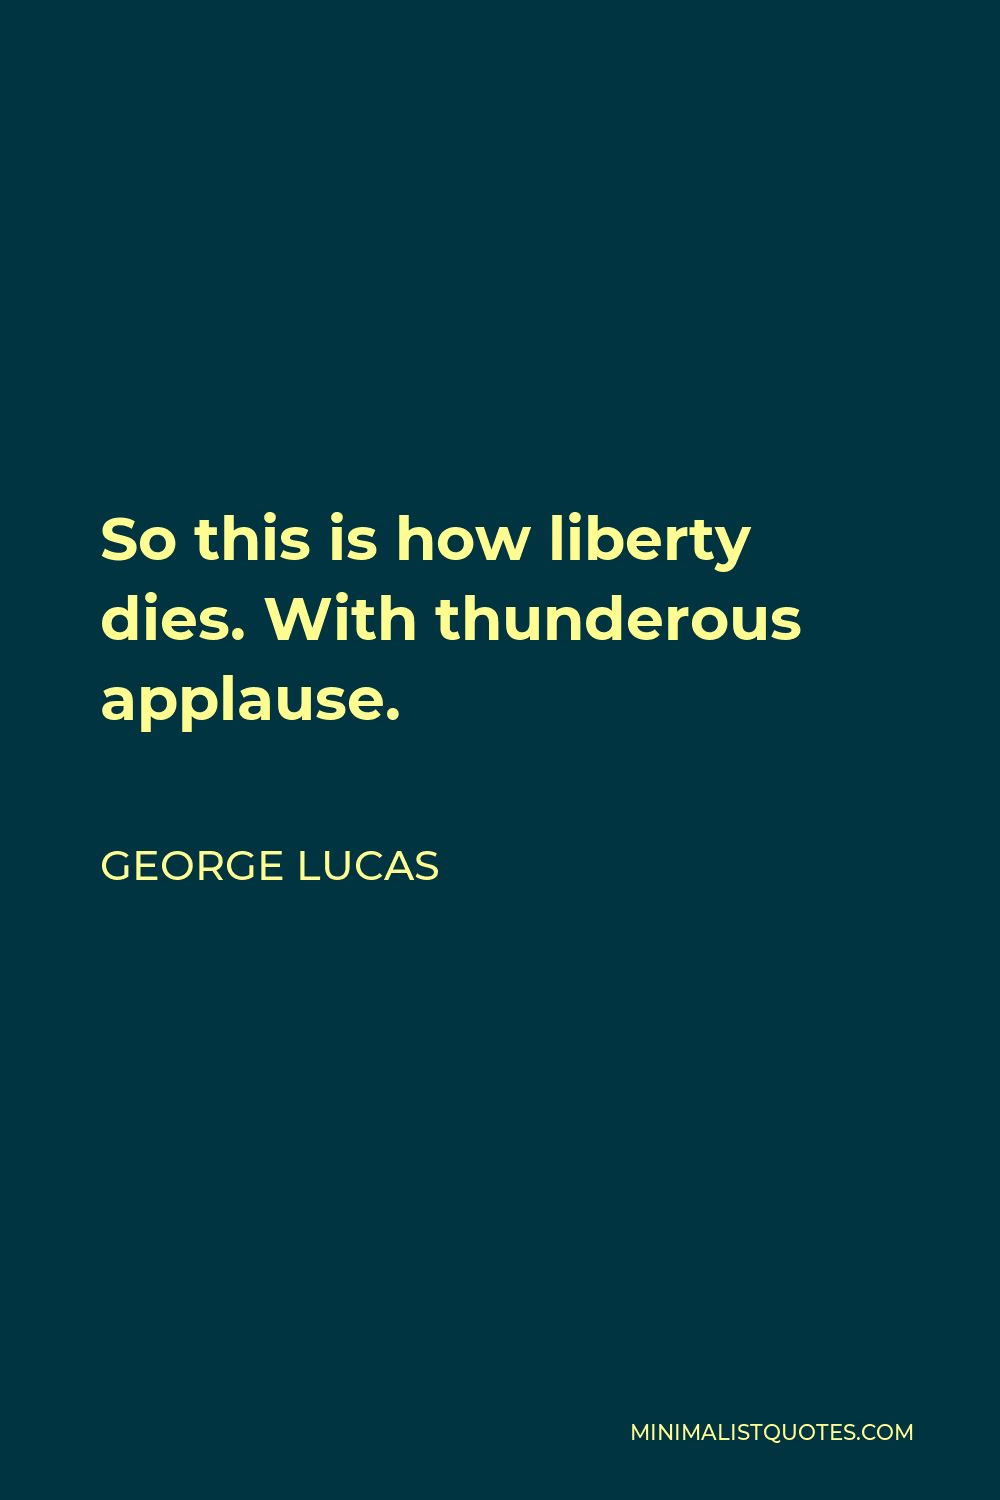 George Lucas Quote - So this is how liberty dies. With thunderous applause.